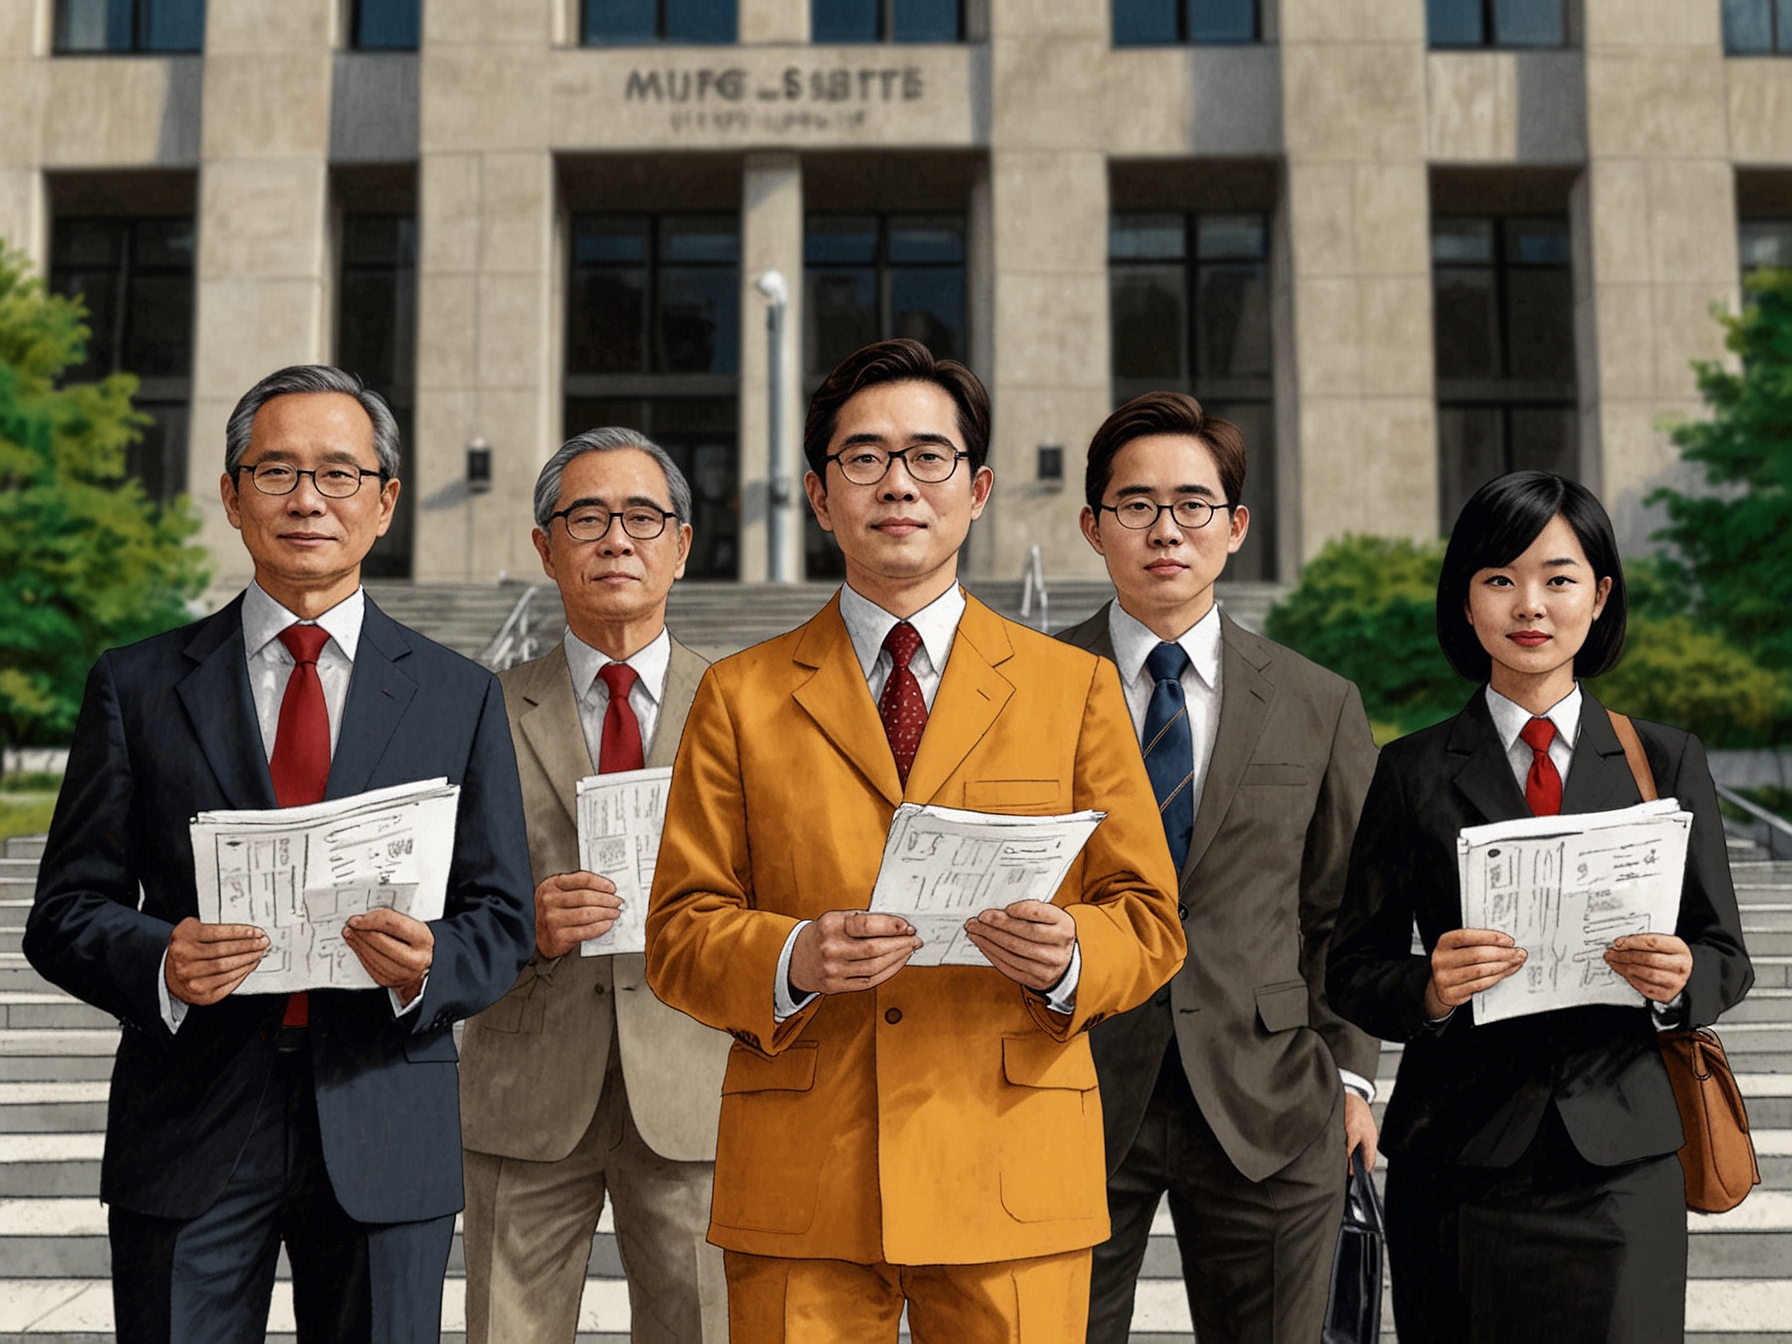 Fourteen plaintiffs stand outside a courthouse in Japan, holding documents, symbolizing their demand for compensation from MUFG over Credit Suisse AT1 bond losses.